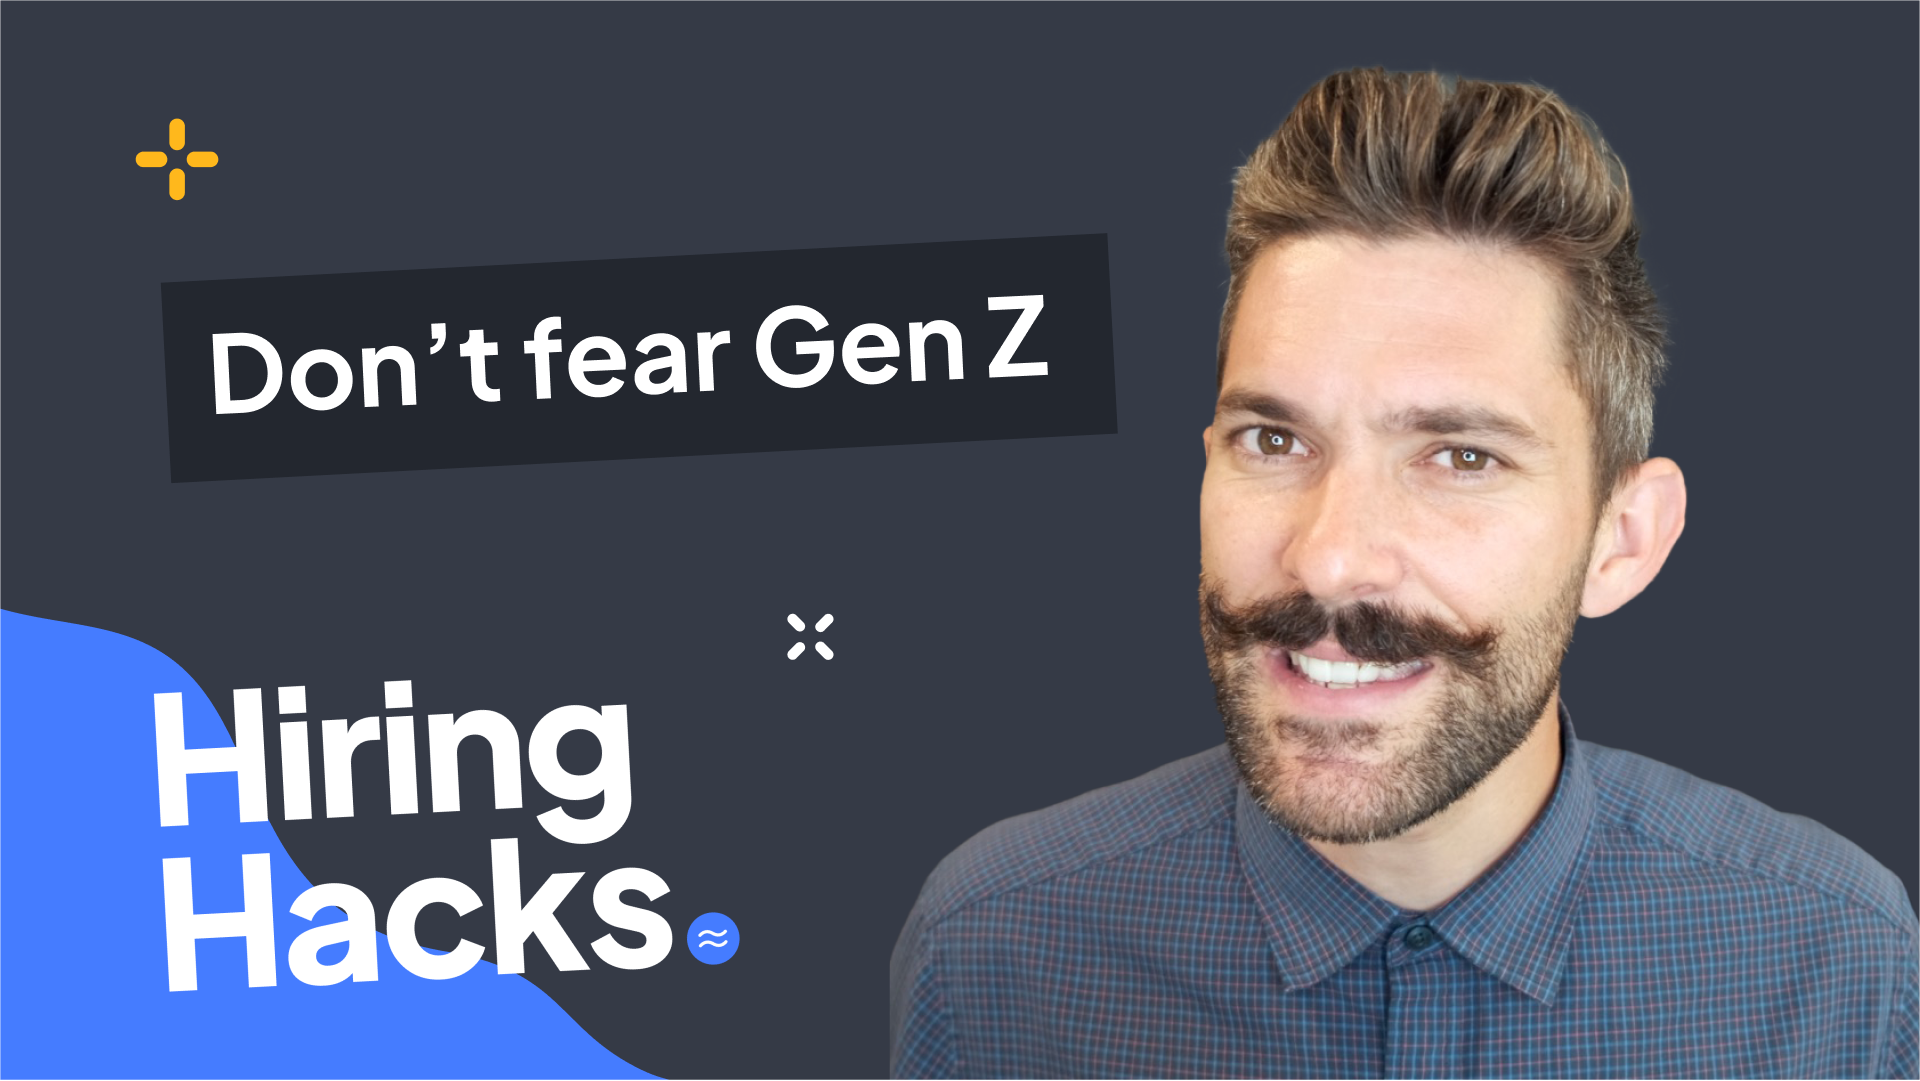 Hiring Hacks: How to hire and retain Gen Z workers